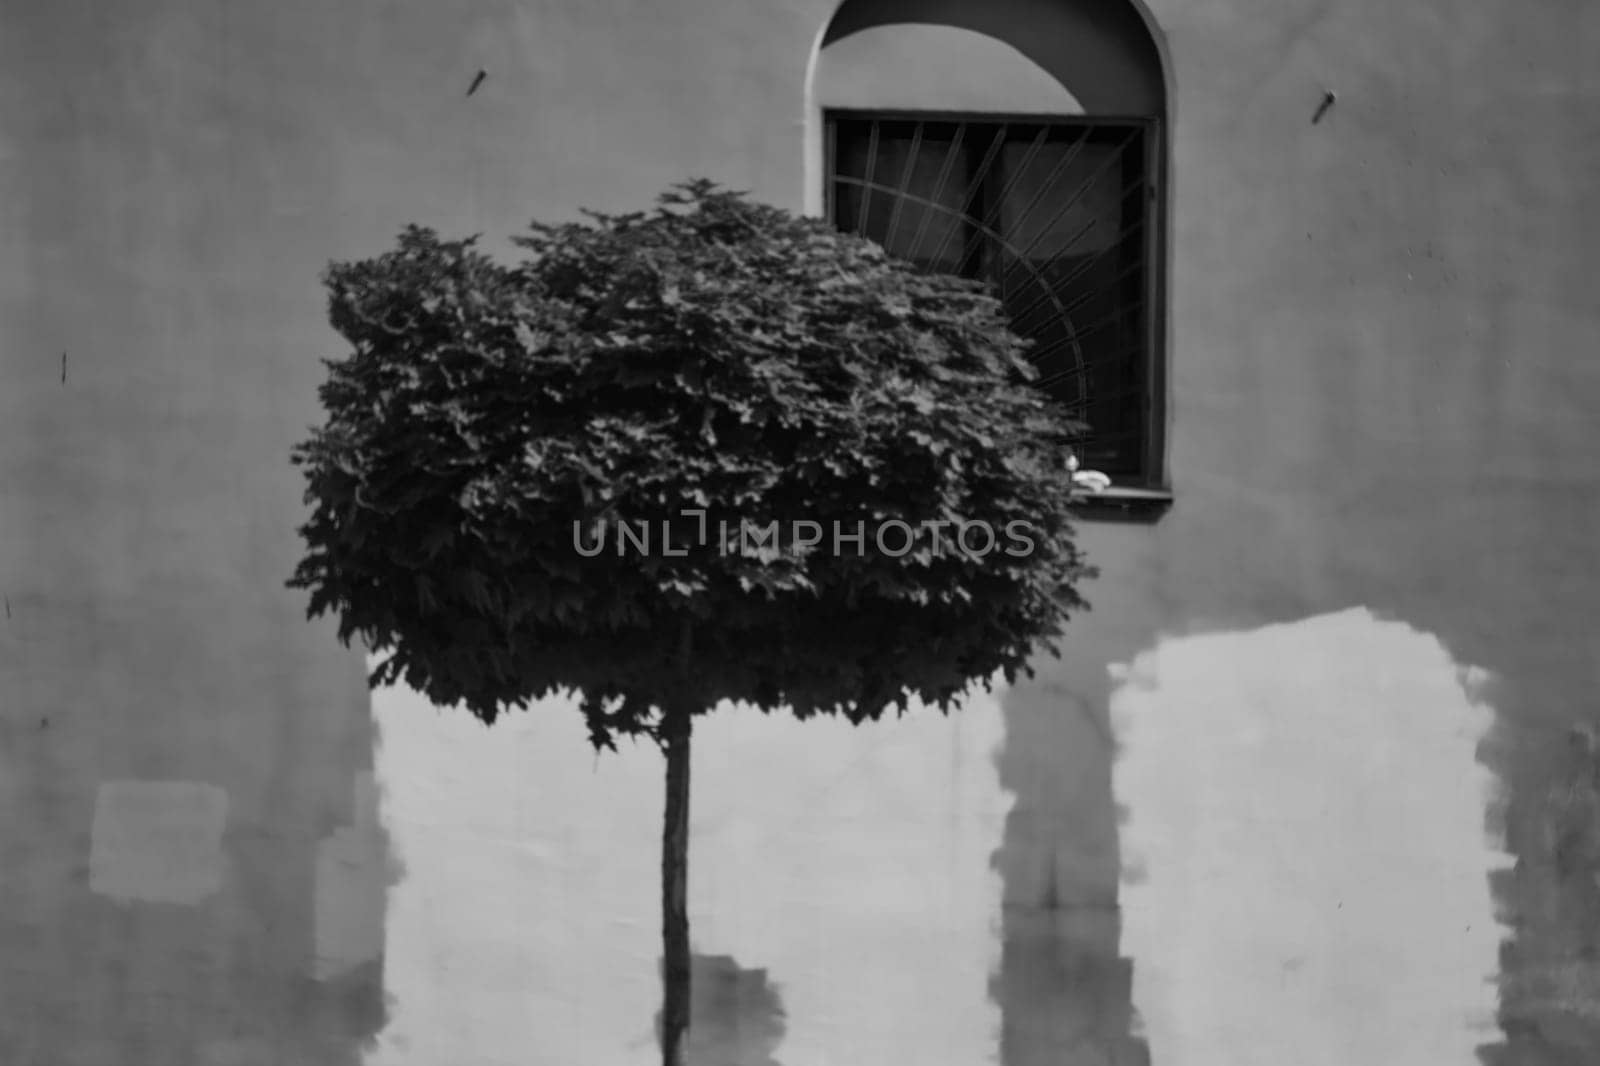 Monochrome photograph of trimmed tree against background of building wall and window. Painted inscriptions.